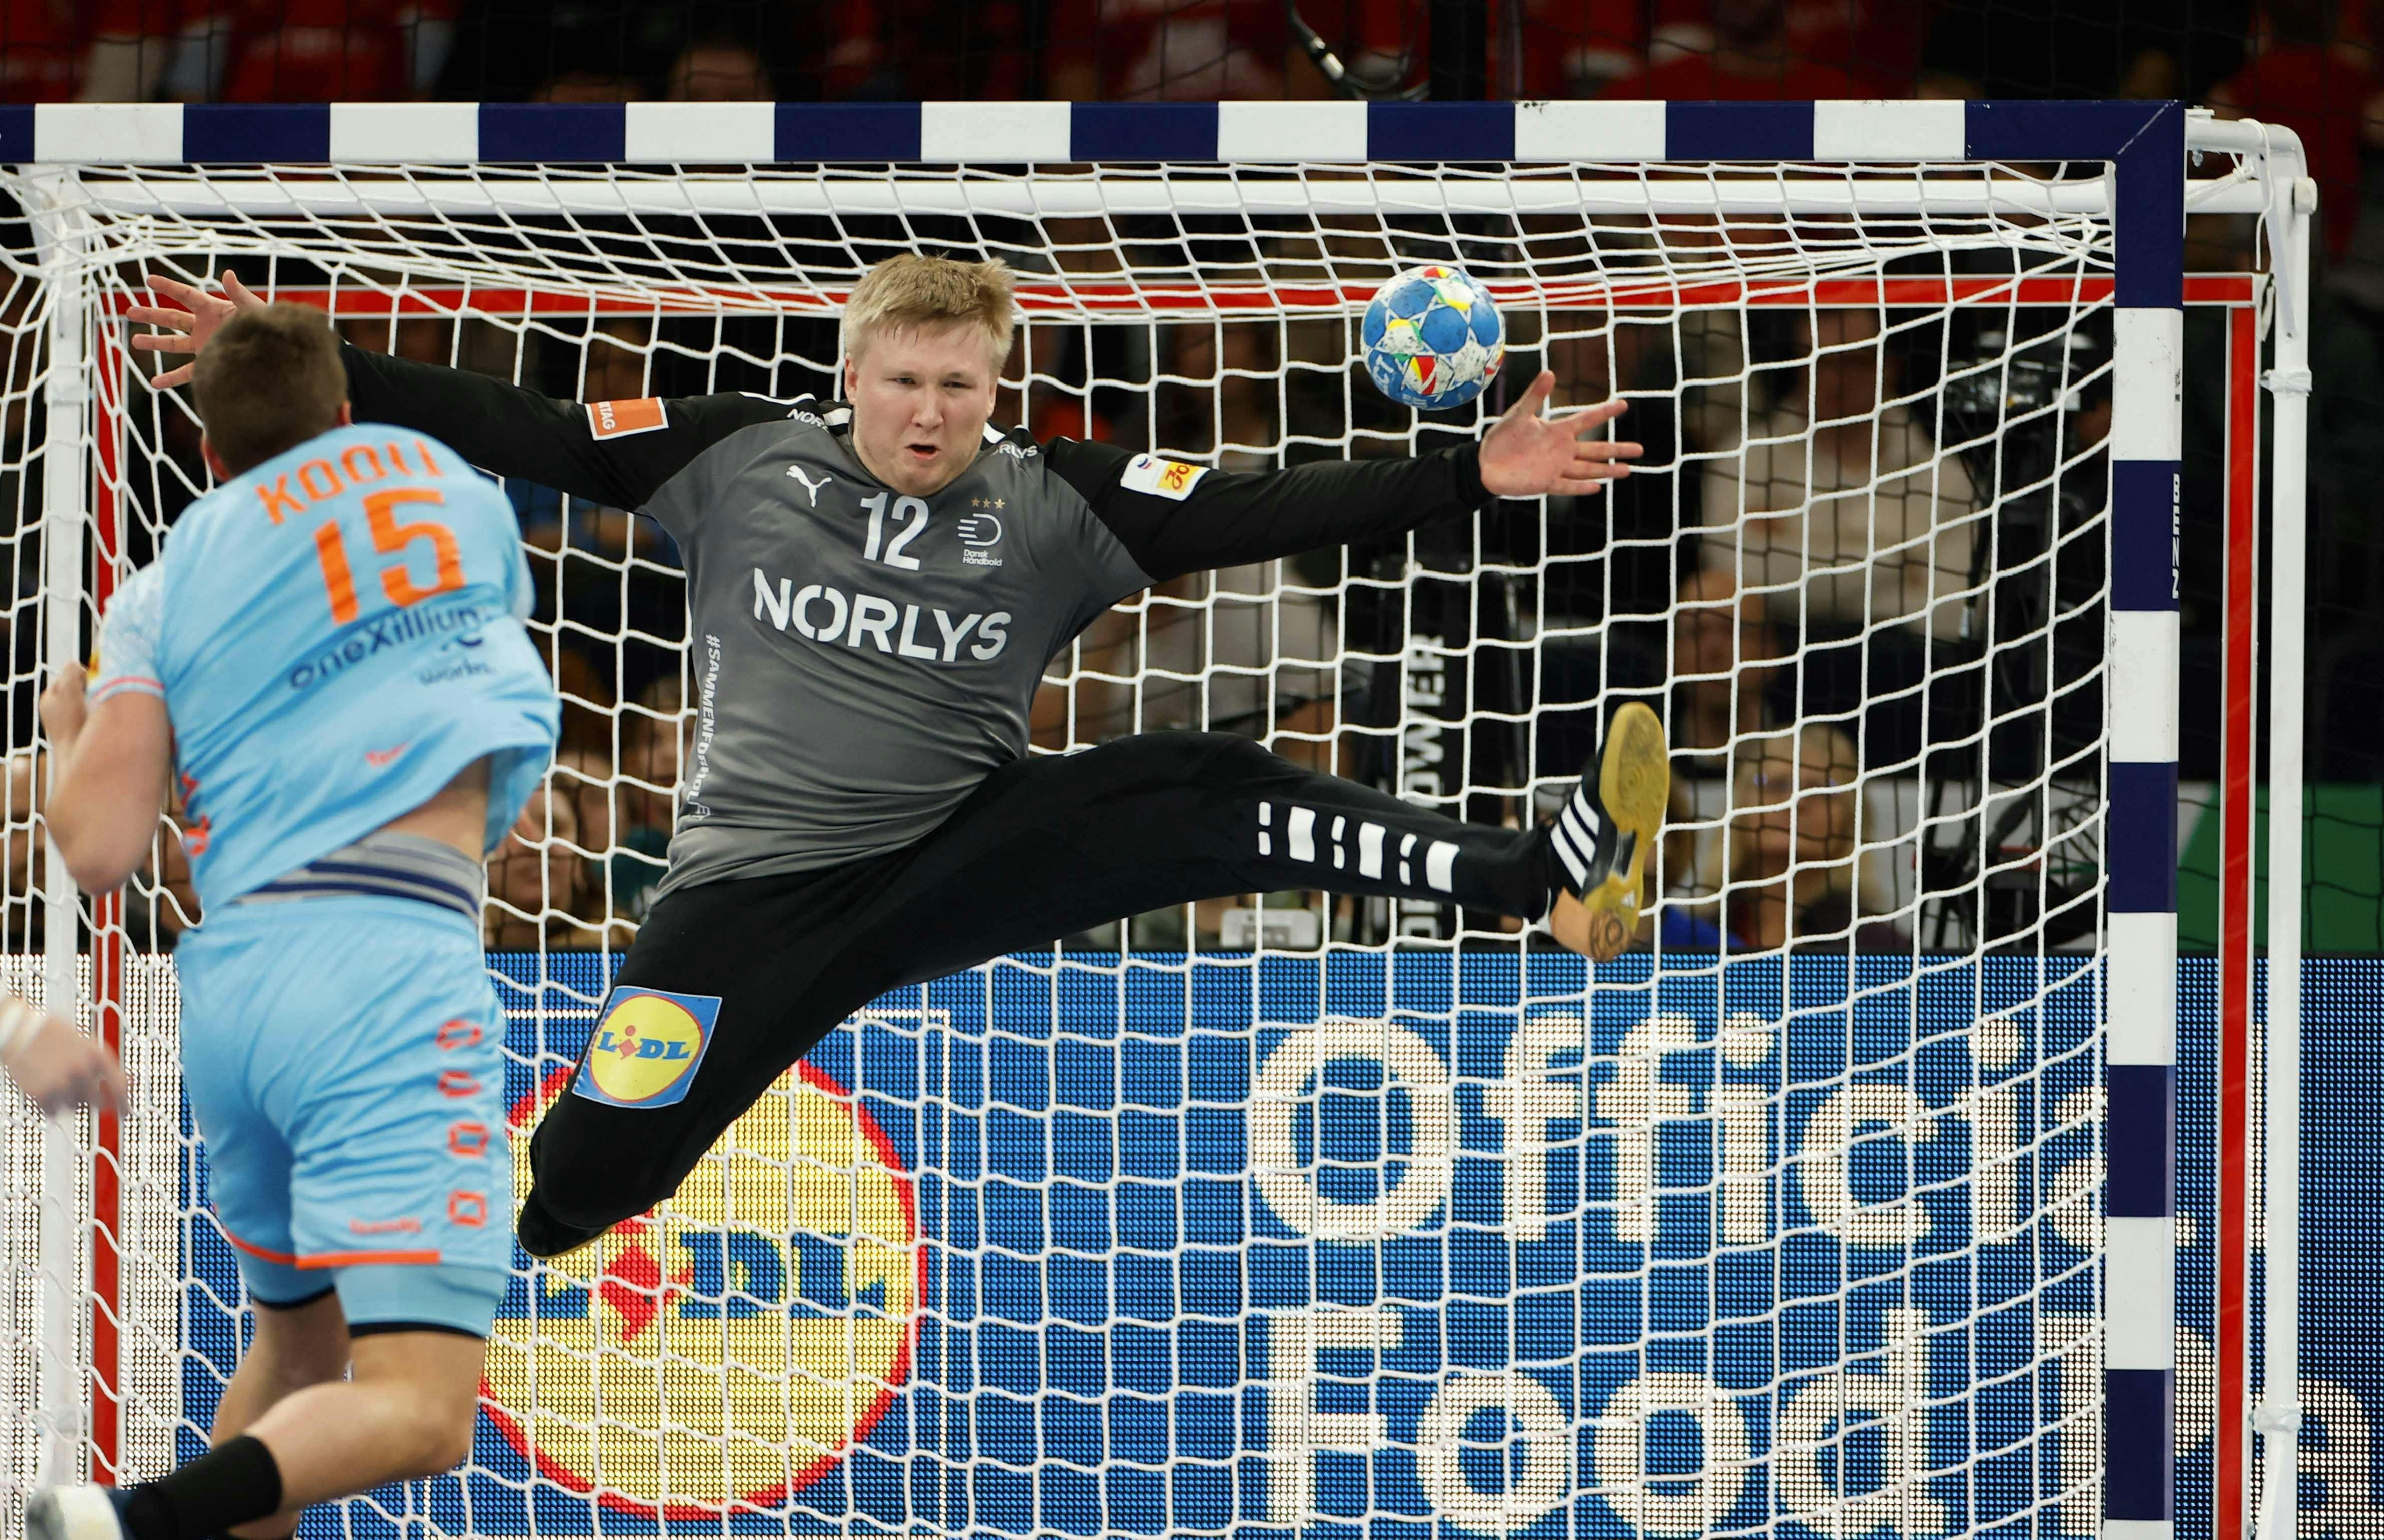 Denmark's goalkeeper #12 Emil Nielsen reaches for the ball during the Men's EURO 2024 EHF Handball European Championship main round match between Denmark and The Netherlands in Hamburg, northern Germany on January 17, 2024. (Photo by Odd ANDERSEN / AFP)